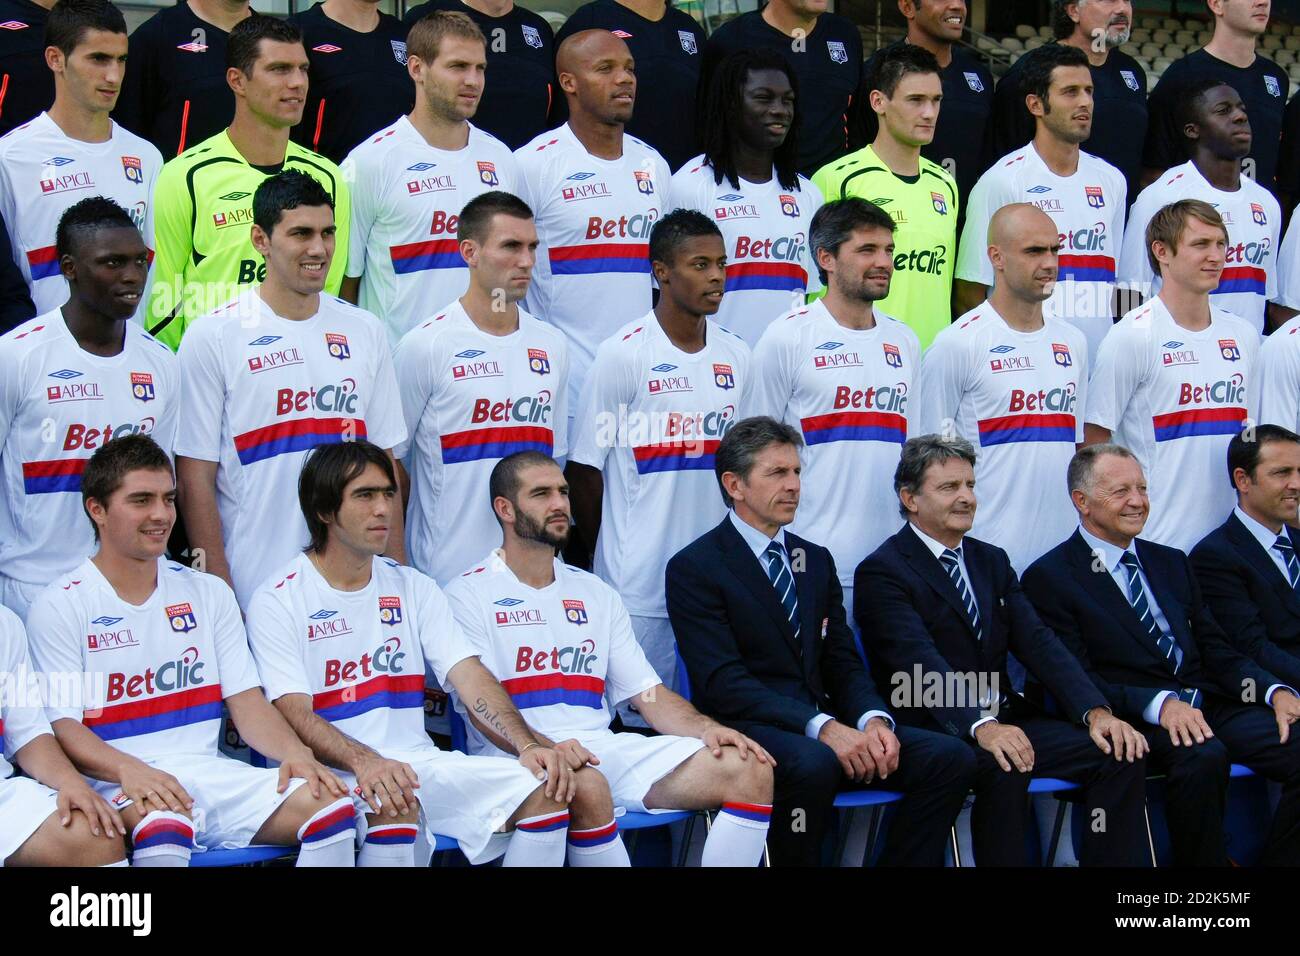 Olympique Lyon's soccer squad poses for a team photo wearing the team  jerseys showing the logo of the sponsor 'Betclic', an online gambling  website, during a photo call at the Gerland stadium